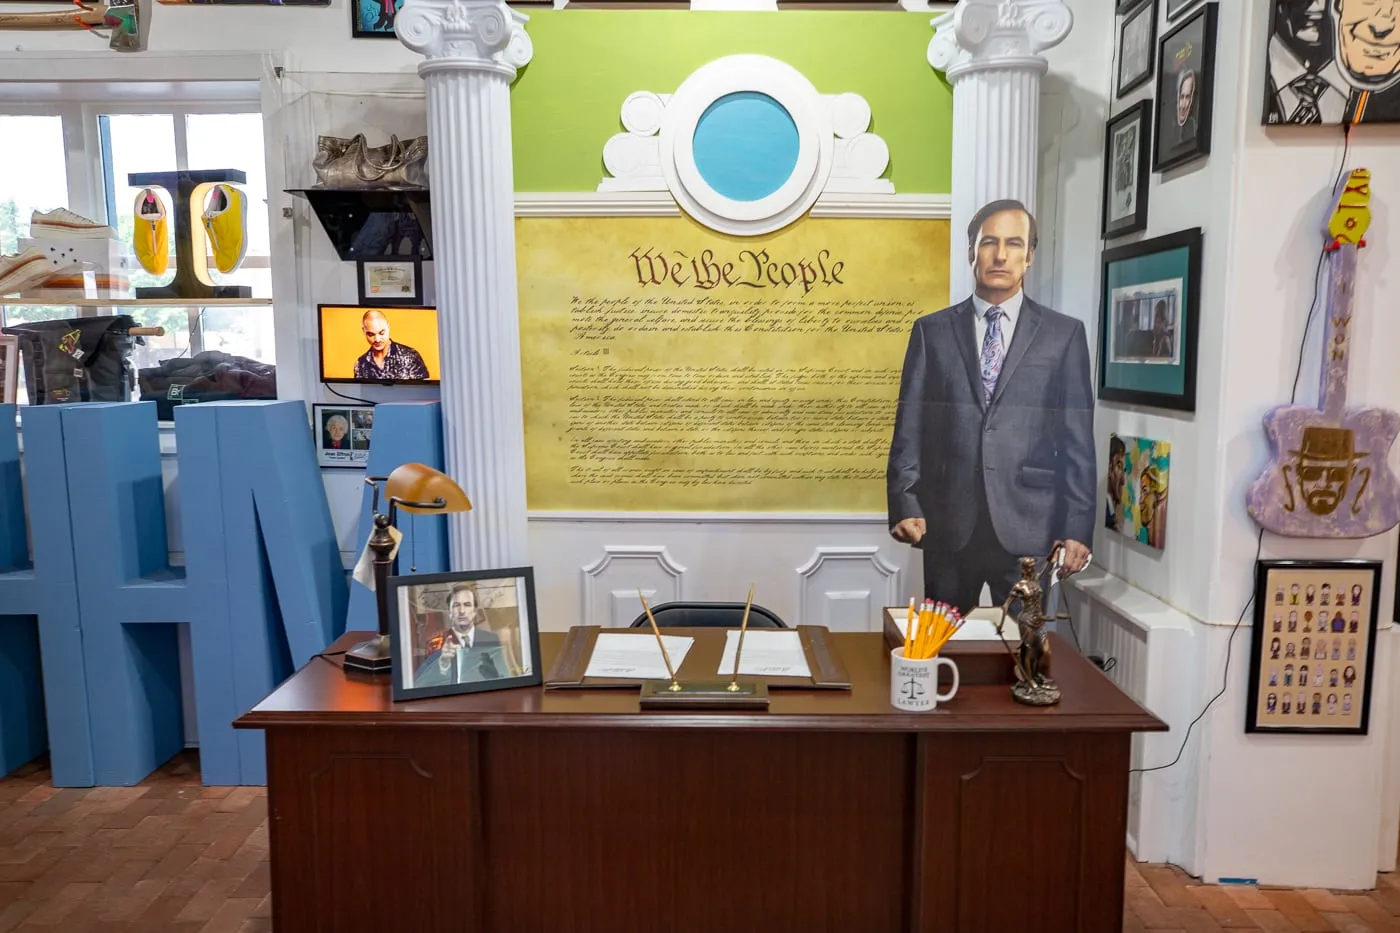 Breaking Bad Better Call Saul Desk Photo Op at the Breaking Bad Store & Museum in Albuquerque, New Mexico